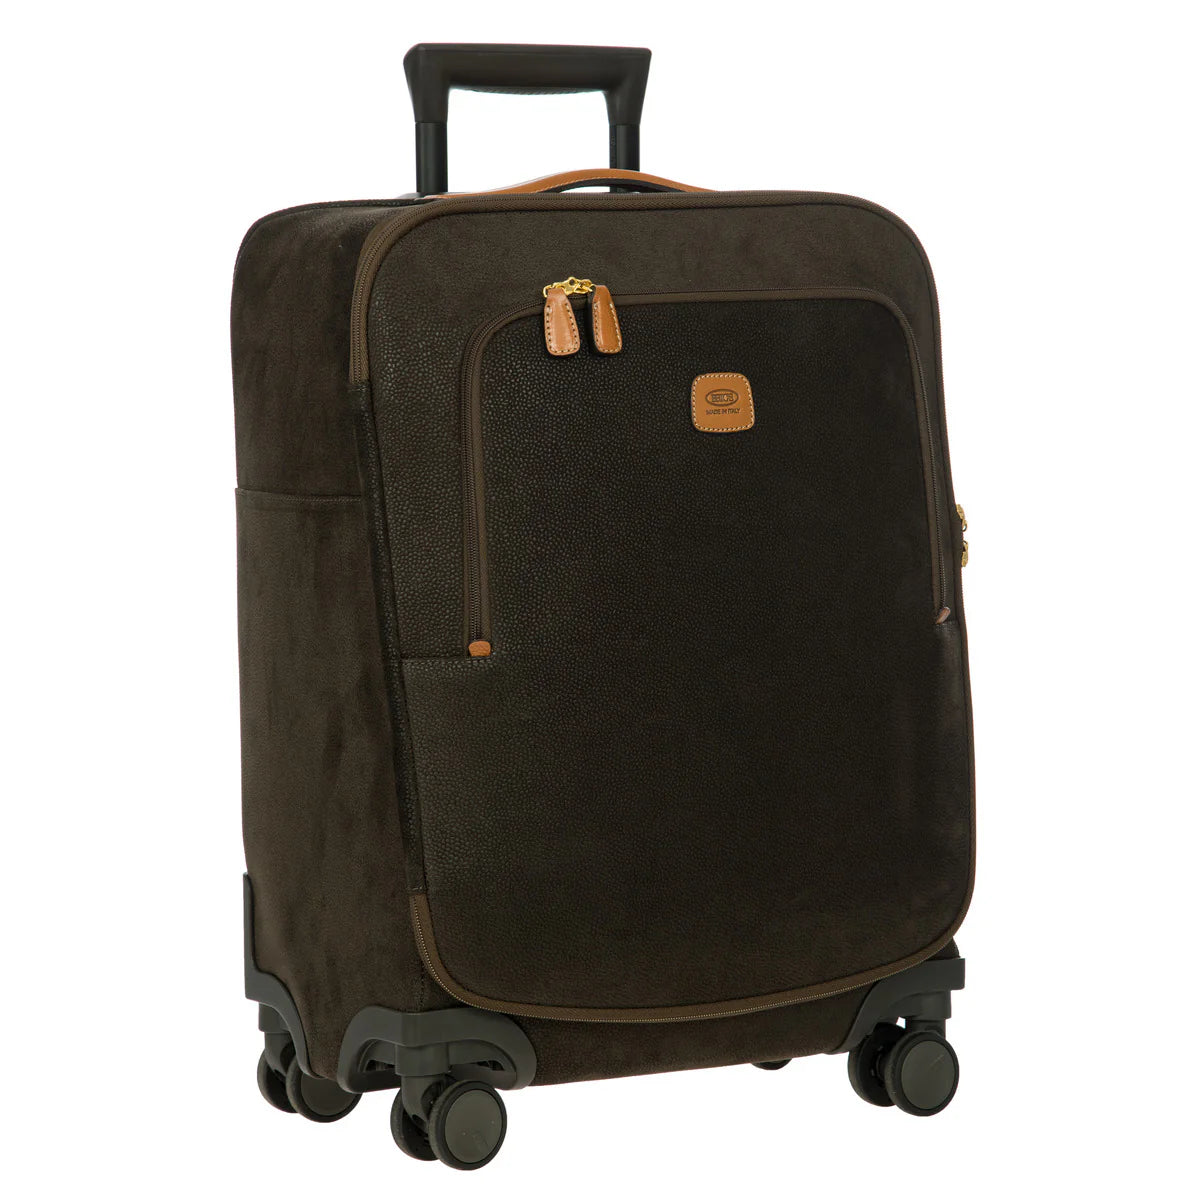 BRIC'S LIFE CARRY-ON SPINNER COMPOUND